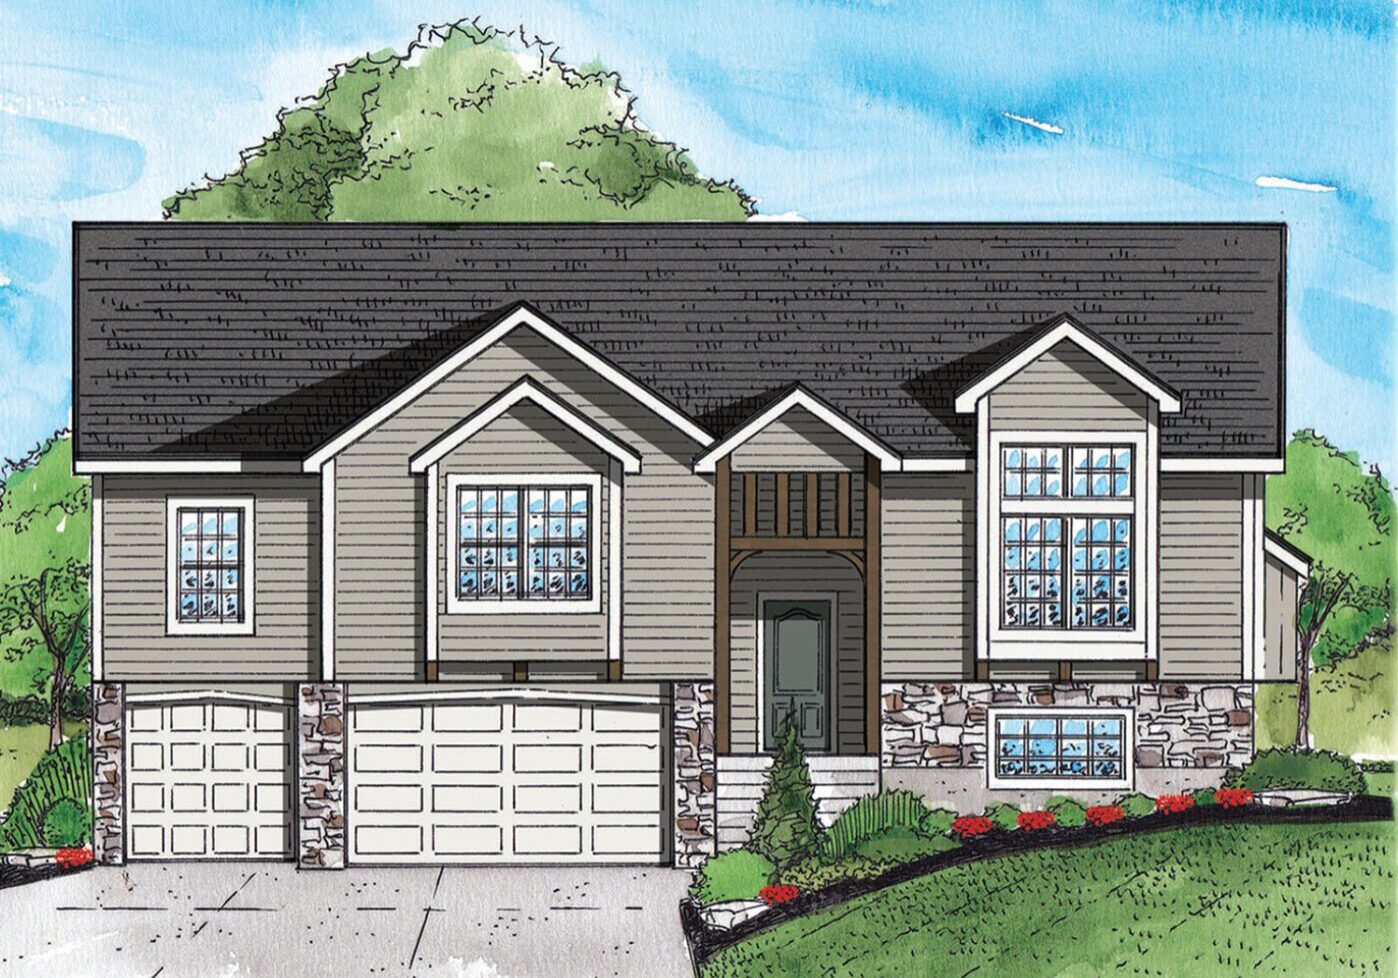 A drawing of a house with a garage door.